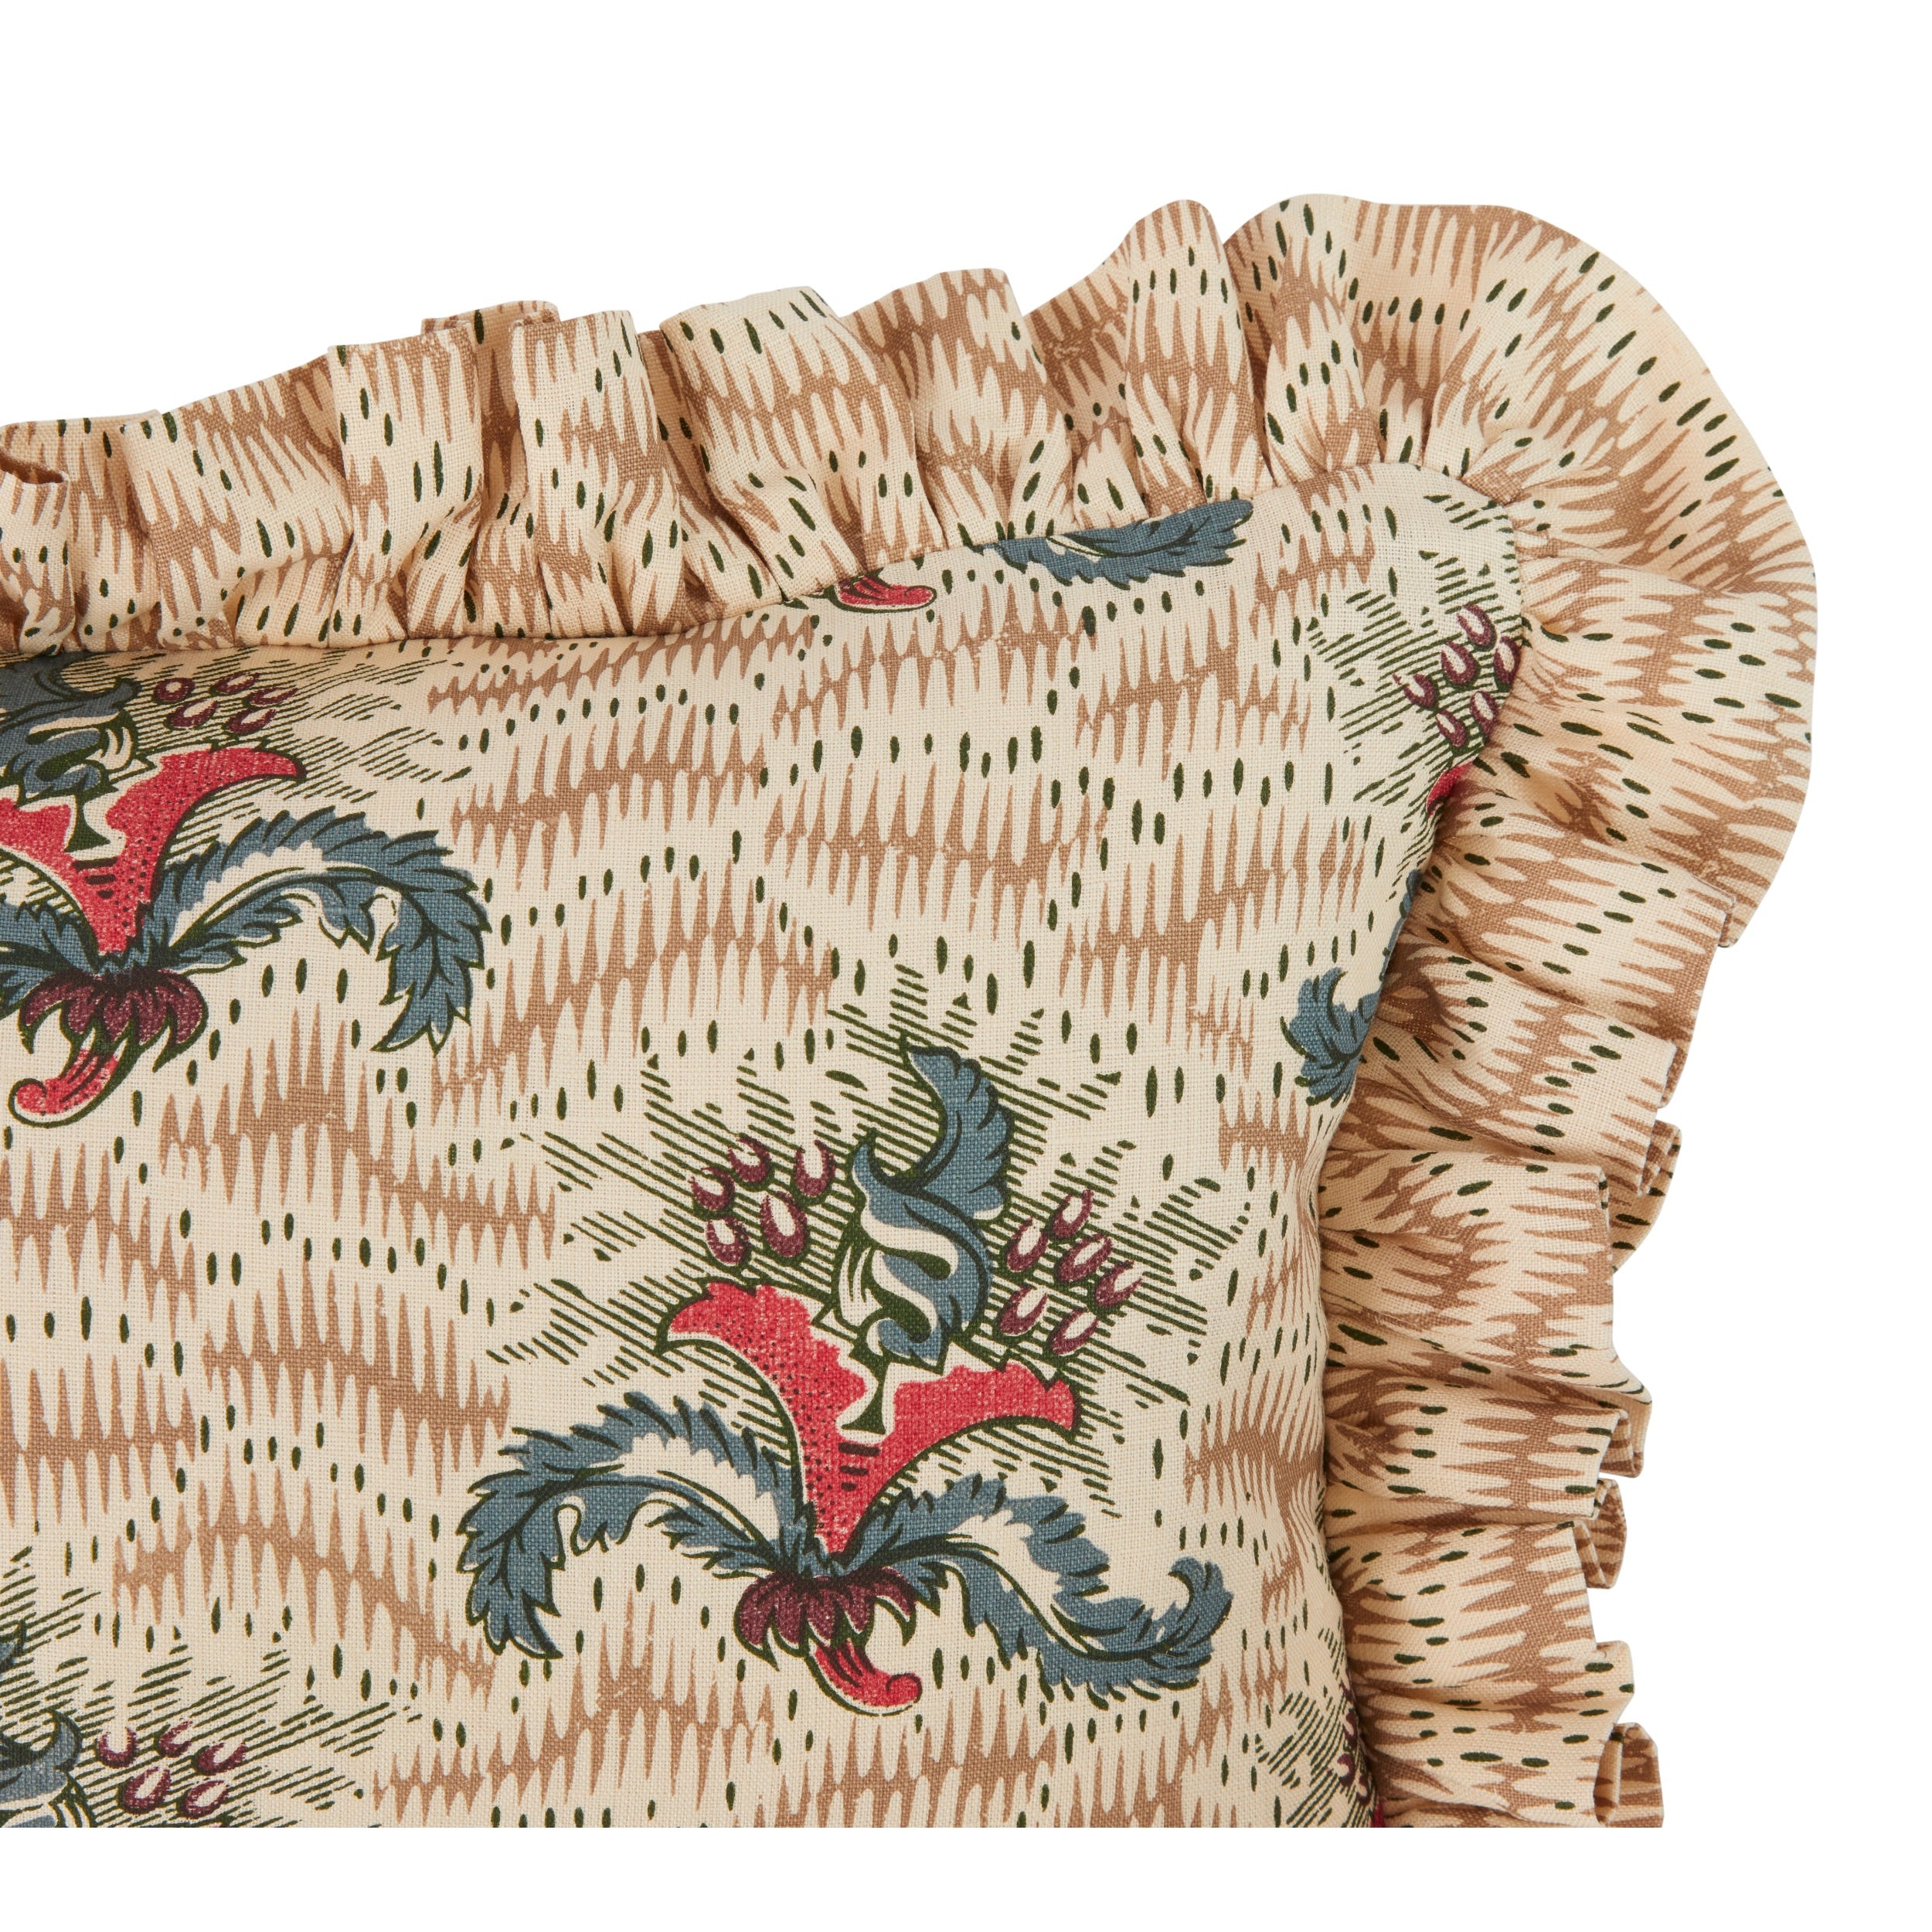 Daphne Bronze and Crab Apple Cushion with a Daphne's Feathers Bronze Gathered Frill